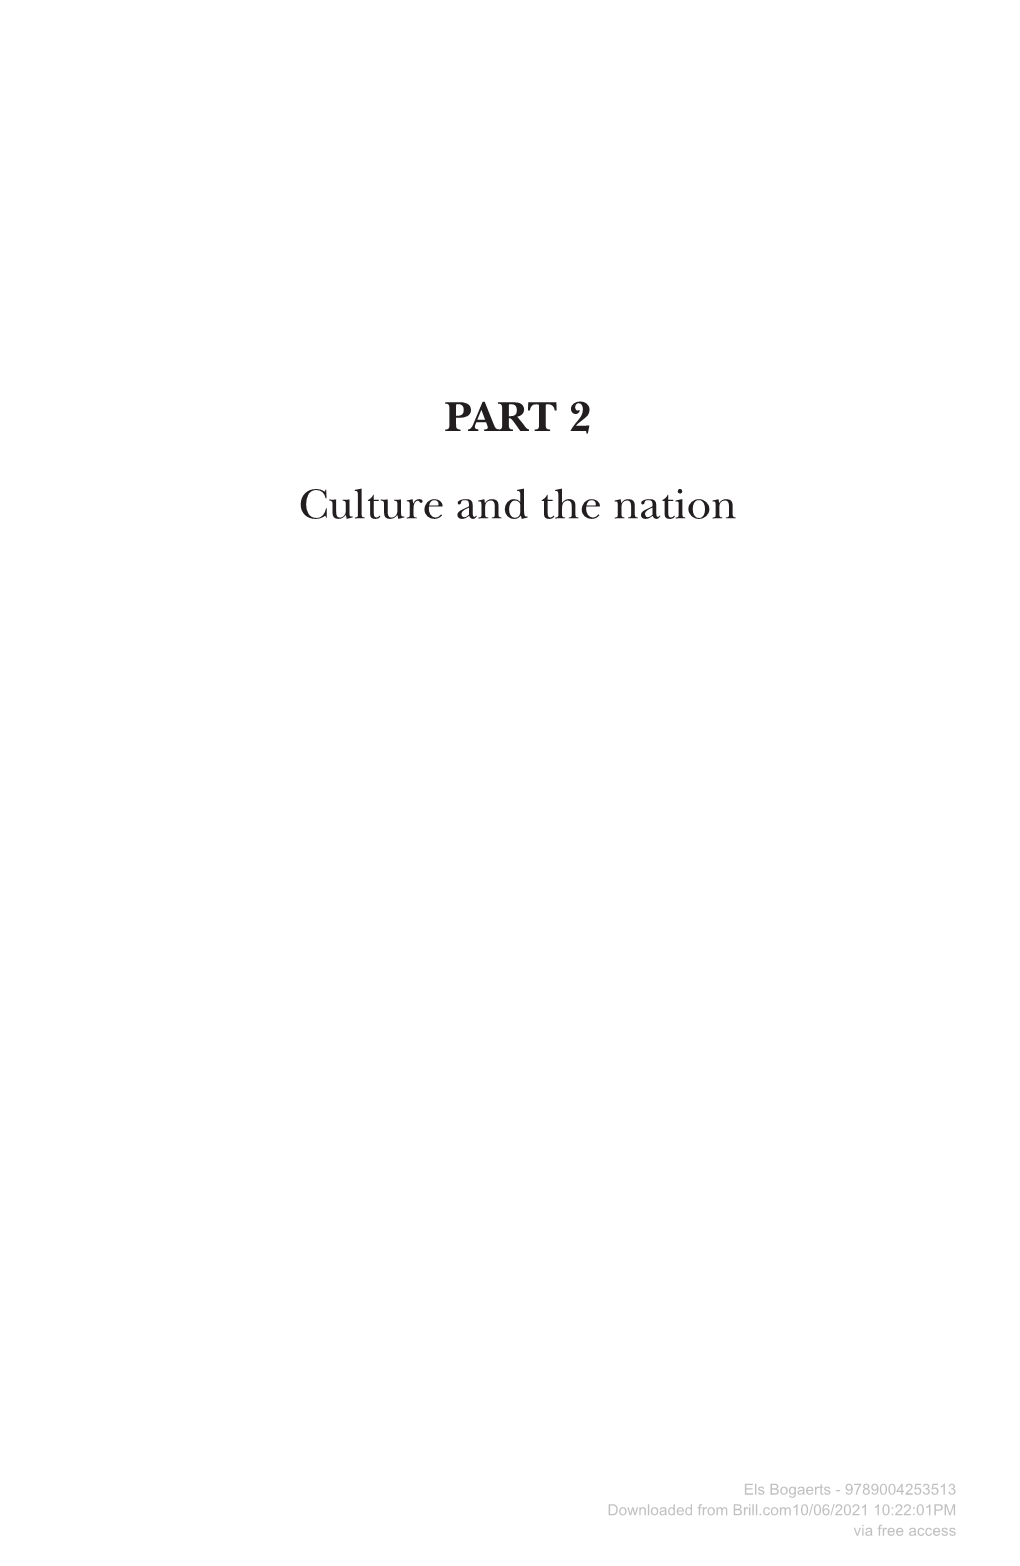 PART 2 Culture and the Nation